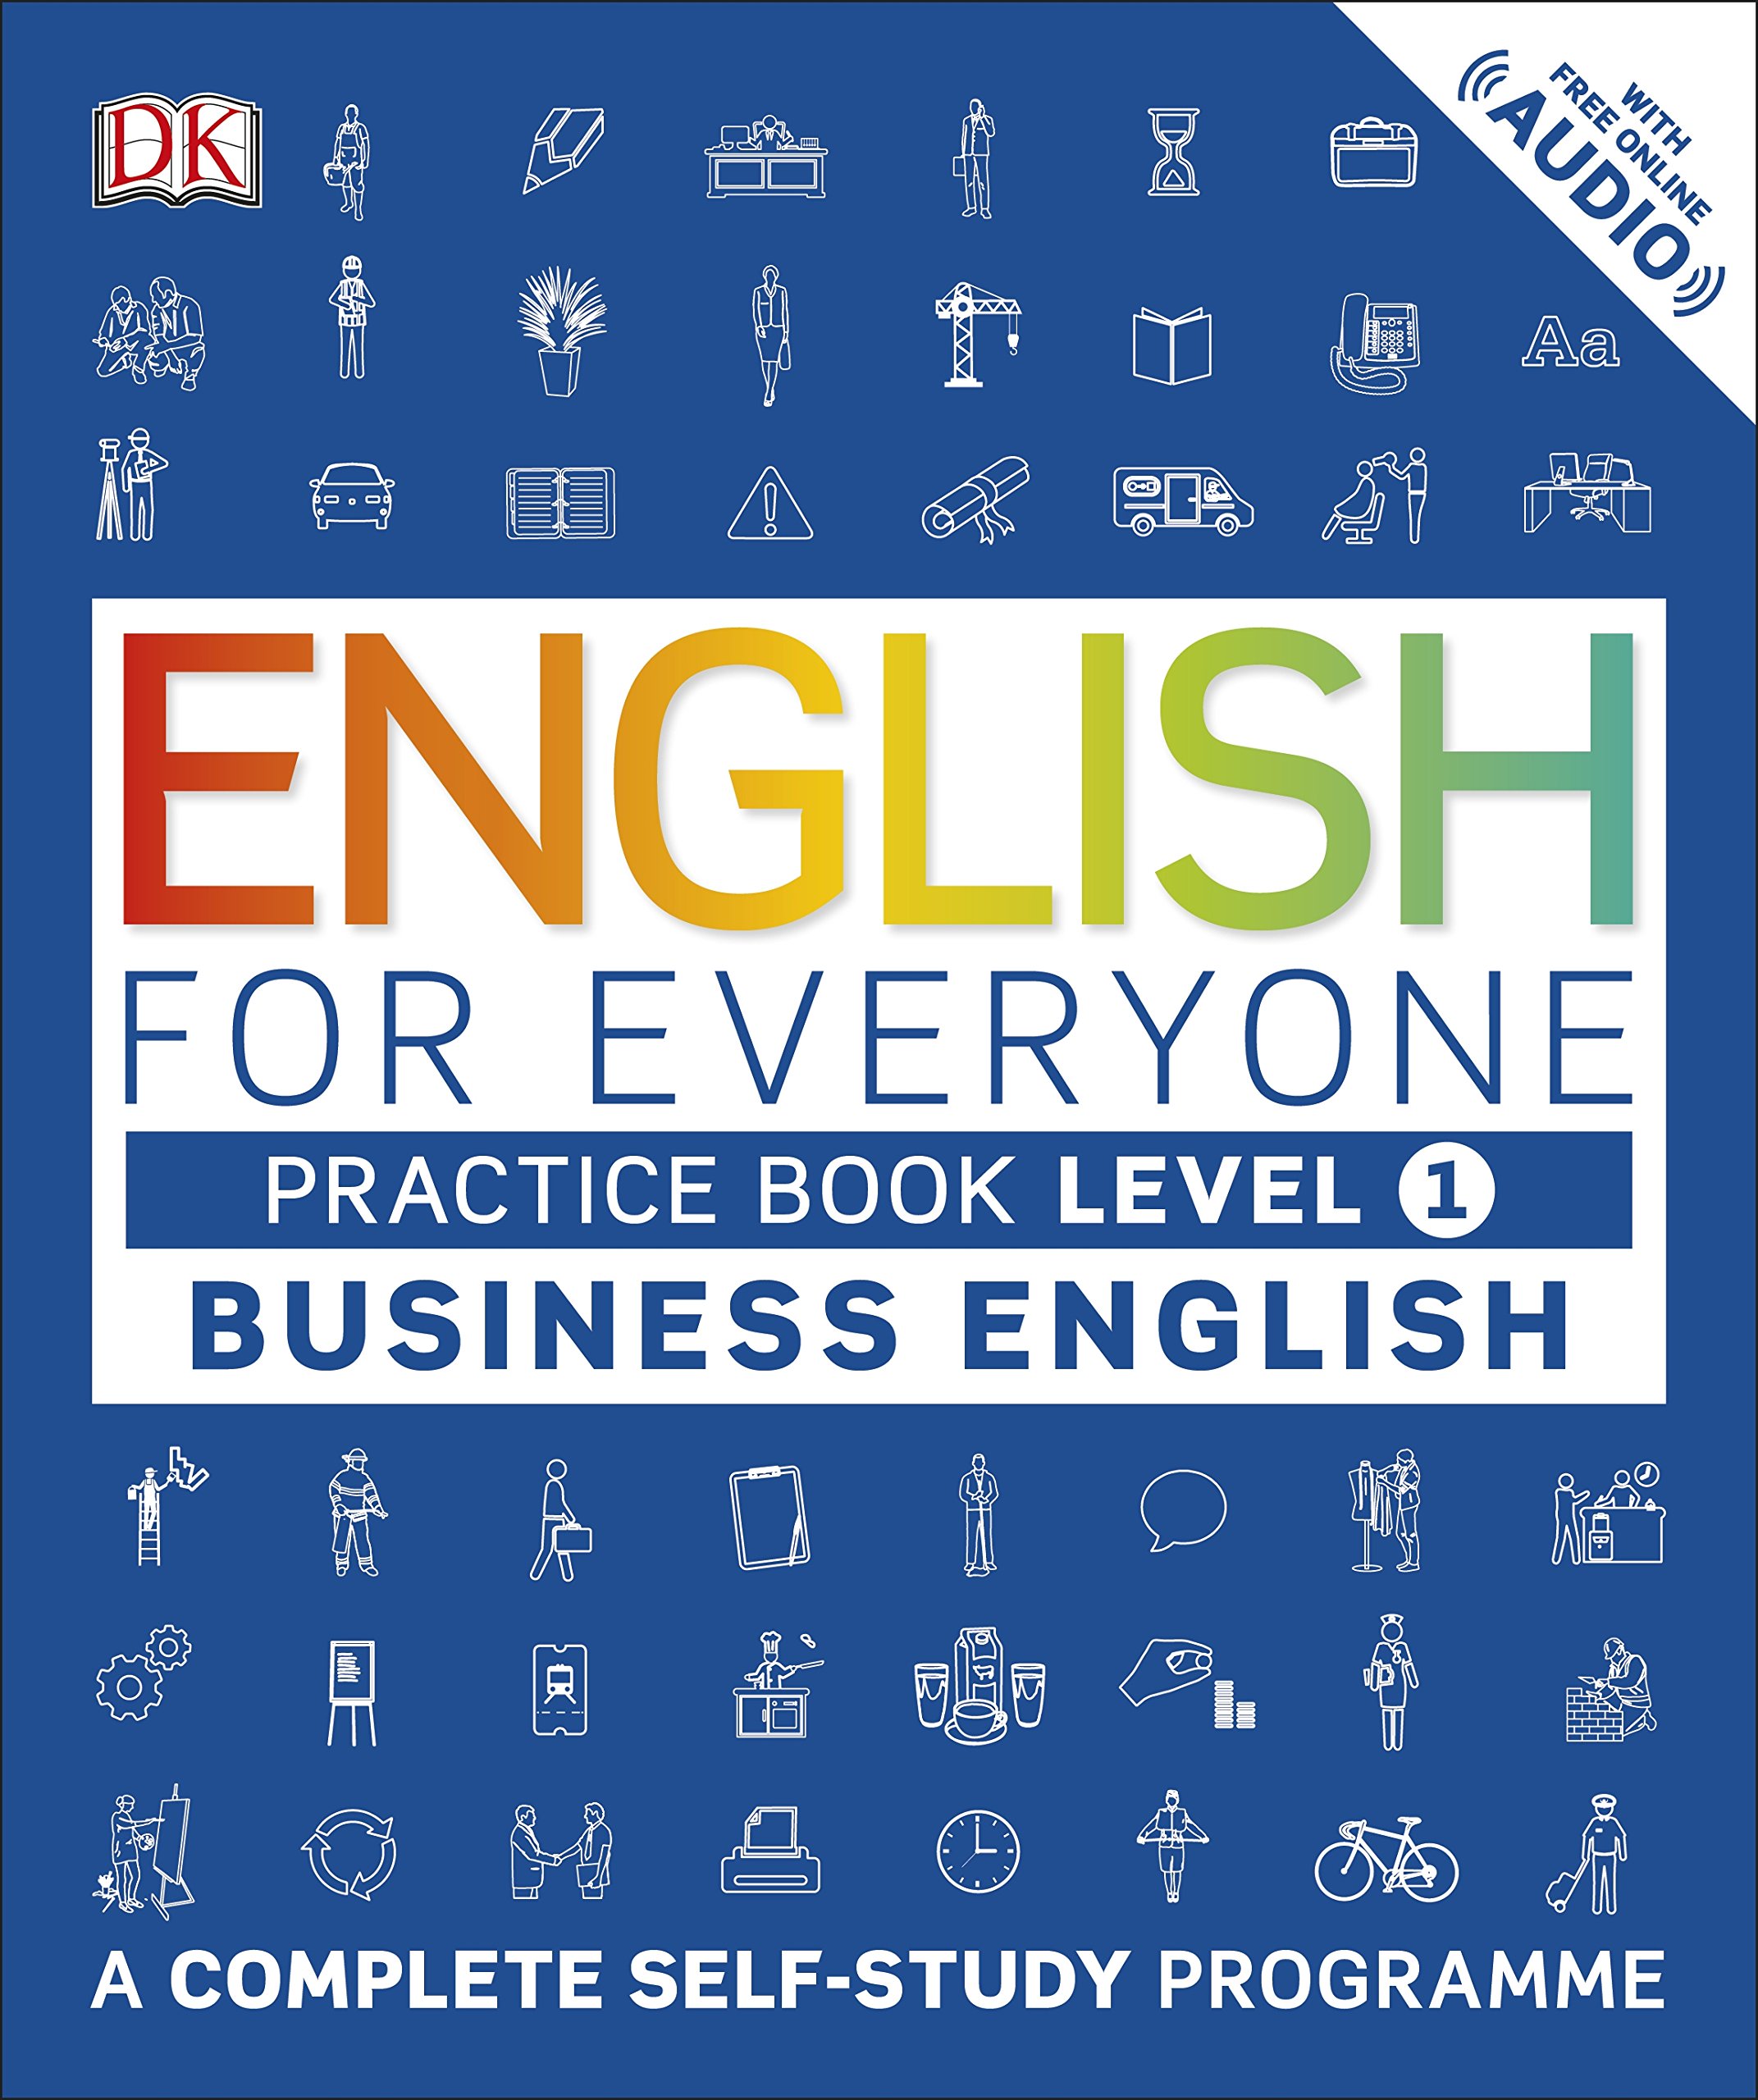 English for Everyone Business English Level 1 Practice Book |